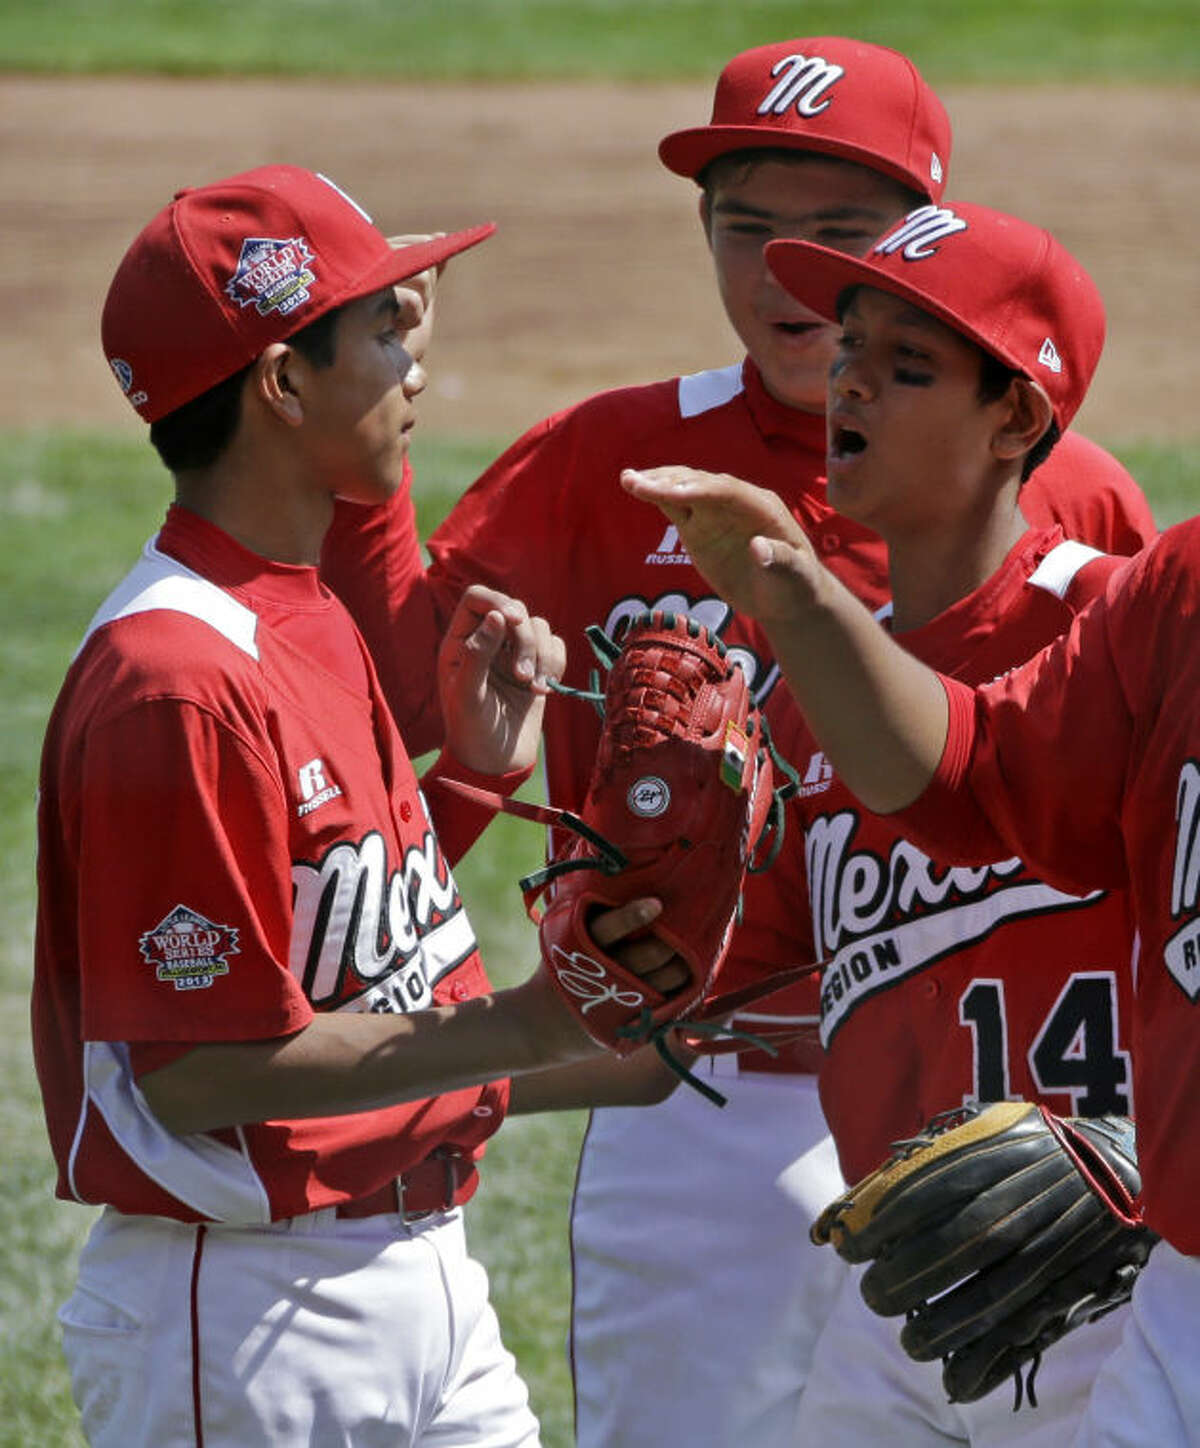 Tijuana, Mexico, pitcher Martin Gonzalez, left, celebrates with teammates Miguel Artalejo, center, and Brandon Montes (14) after getting the final out of a 15-14 win over Westport, Conn., in a consolation baseball game at the Little League World Series tournament in South Williamsport, Pa., Sunday, Aug, 25, 2013. (AP Photo/Gene J. Puskar)